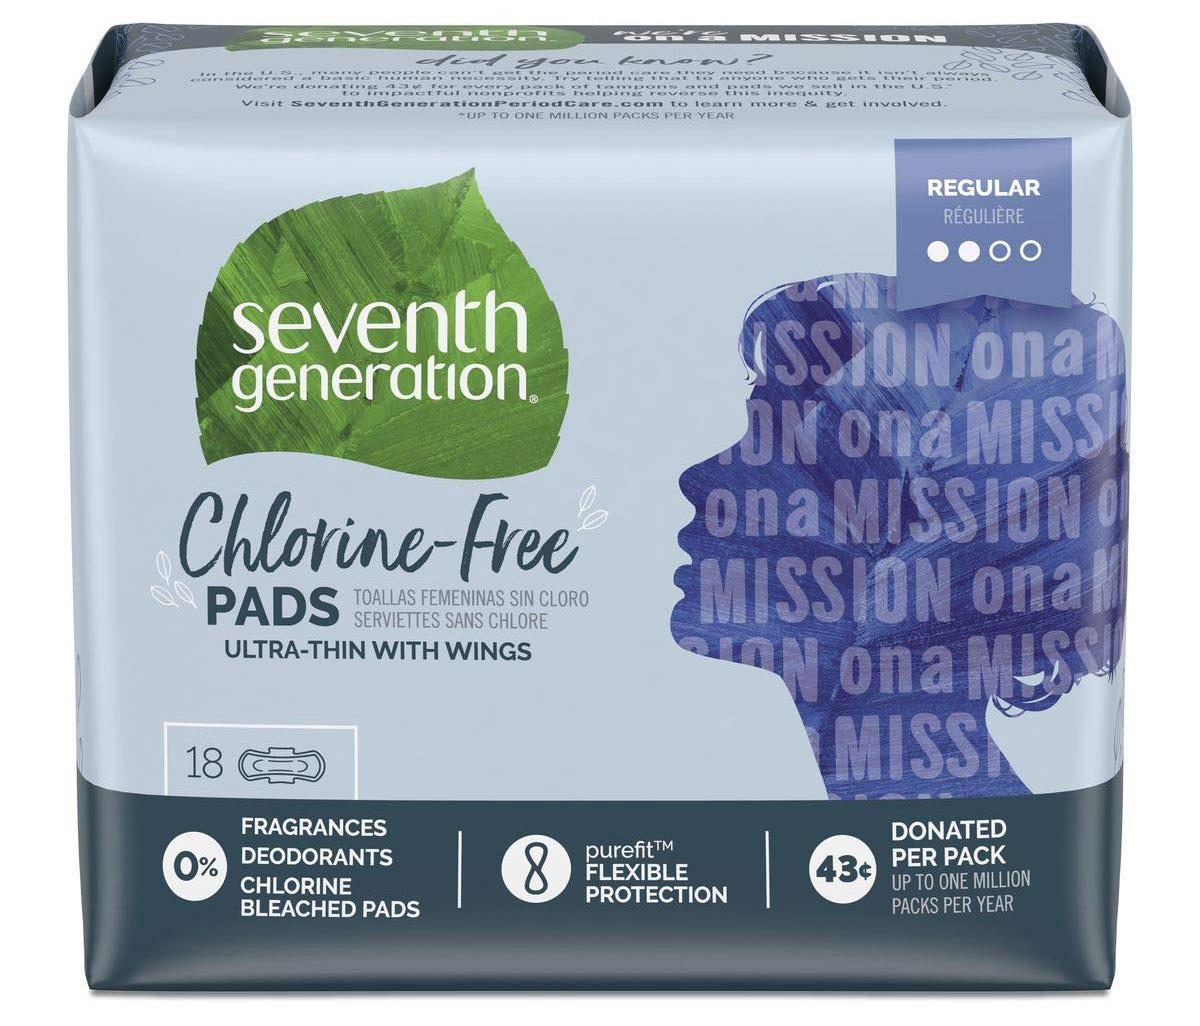 Seventh Generation Ultrathin Pads for $2.99